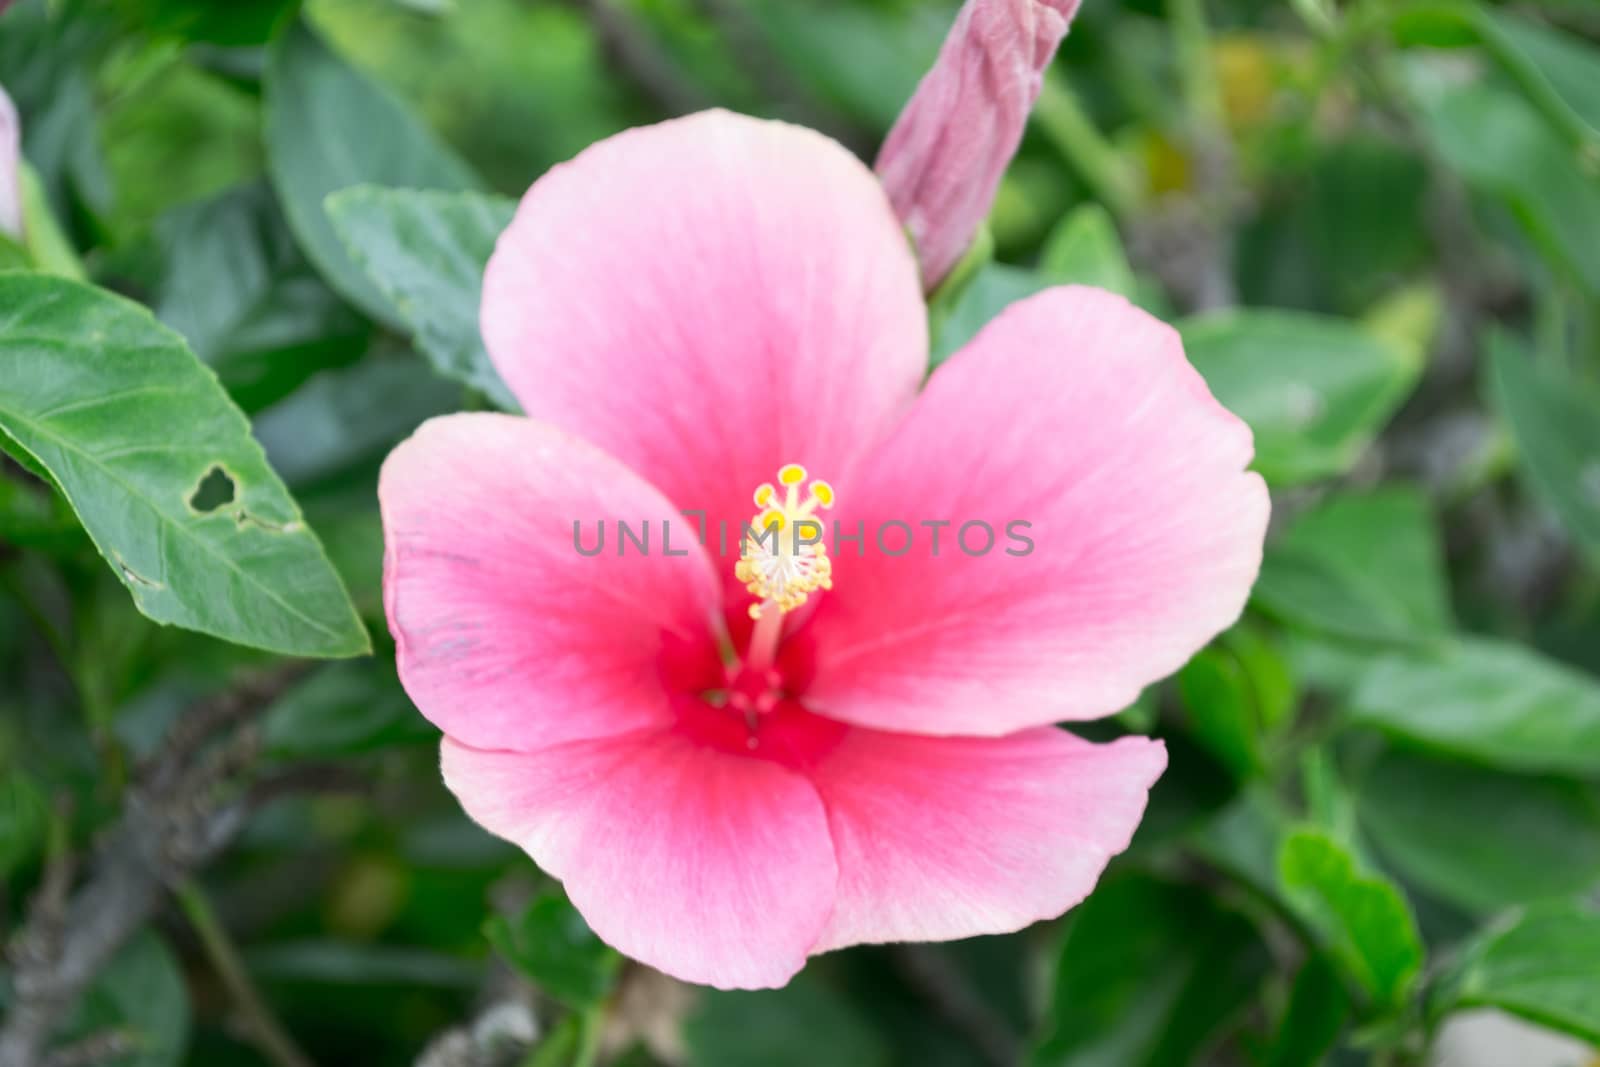 China rose or Hibiscus flower